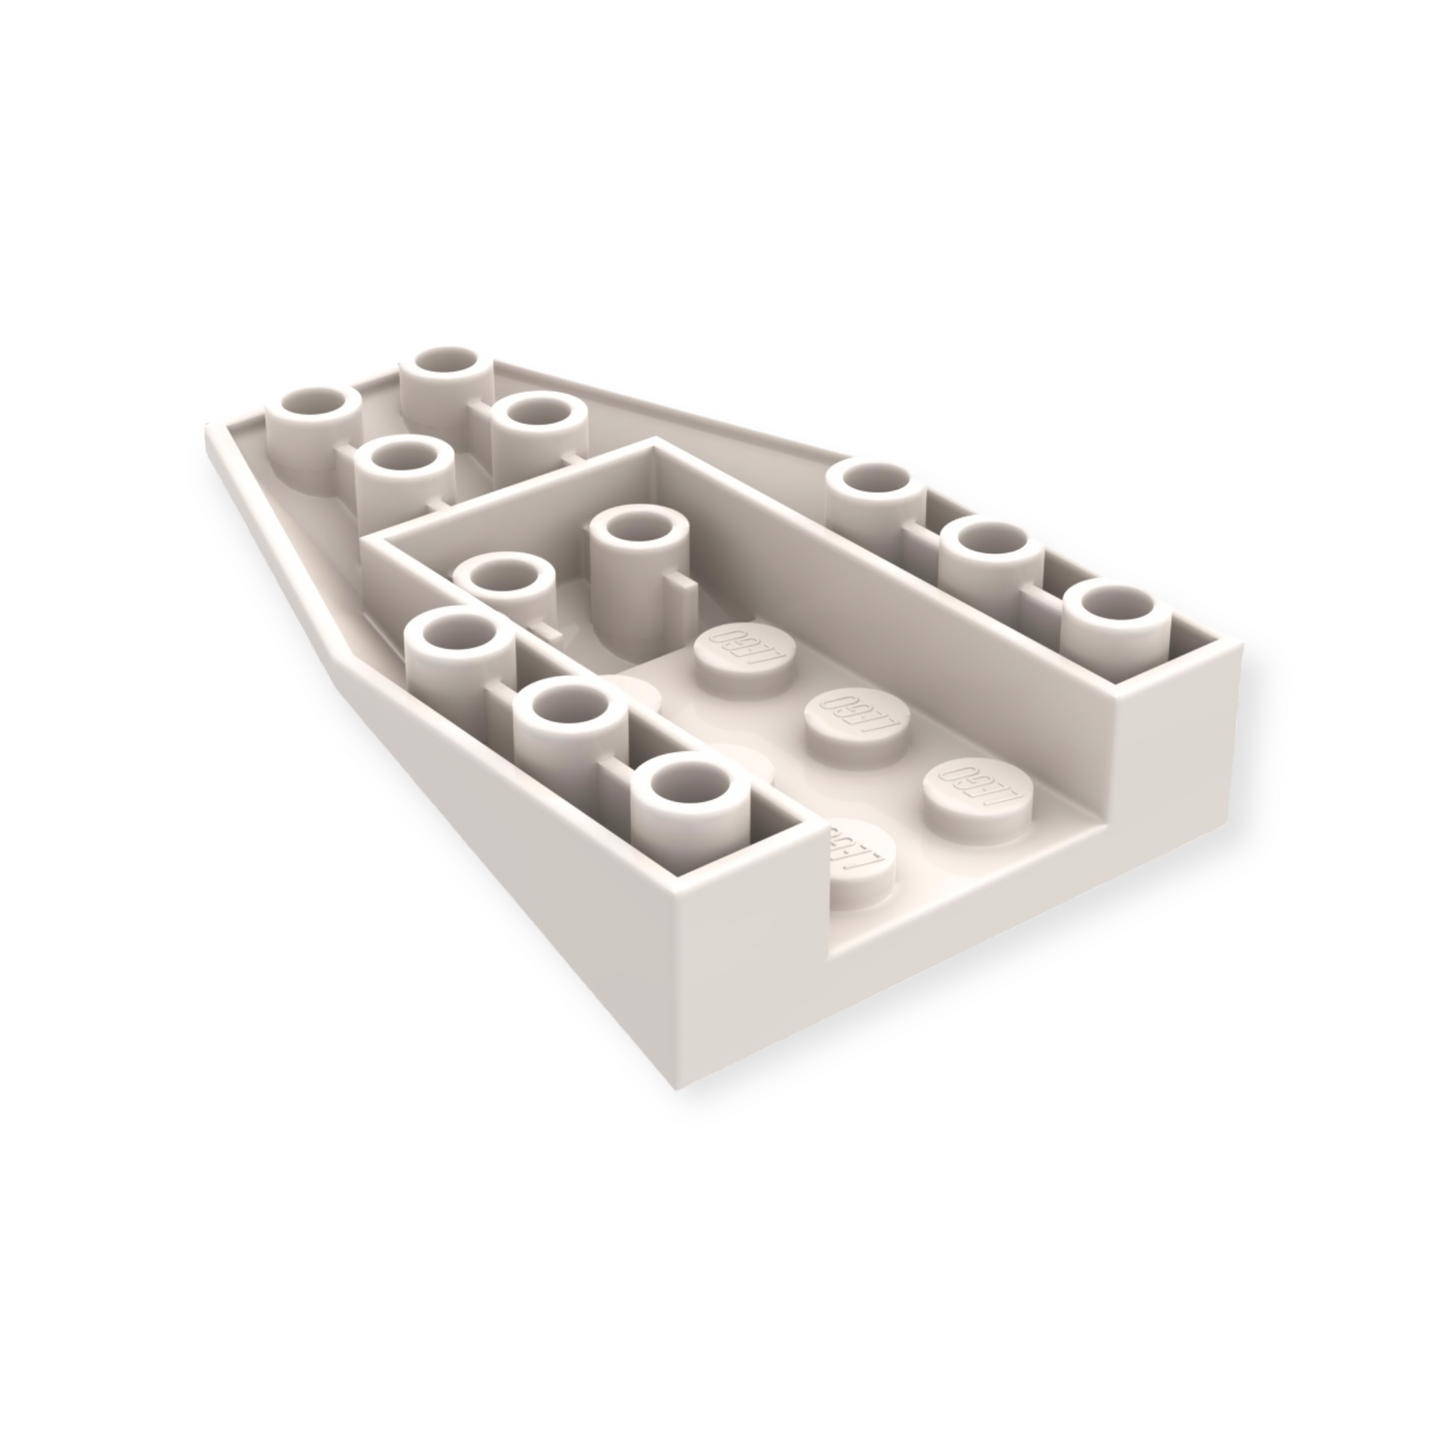 LEGO Wedge 6x4 Triple Inverted in White